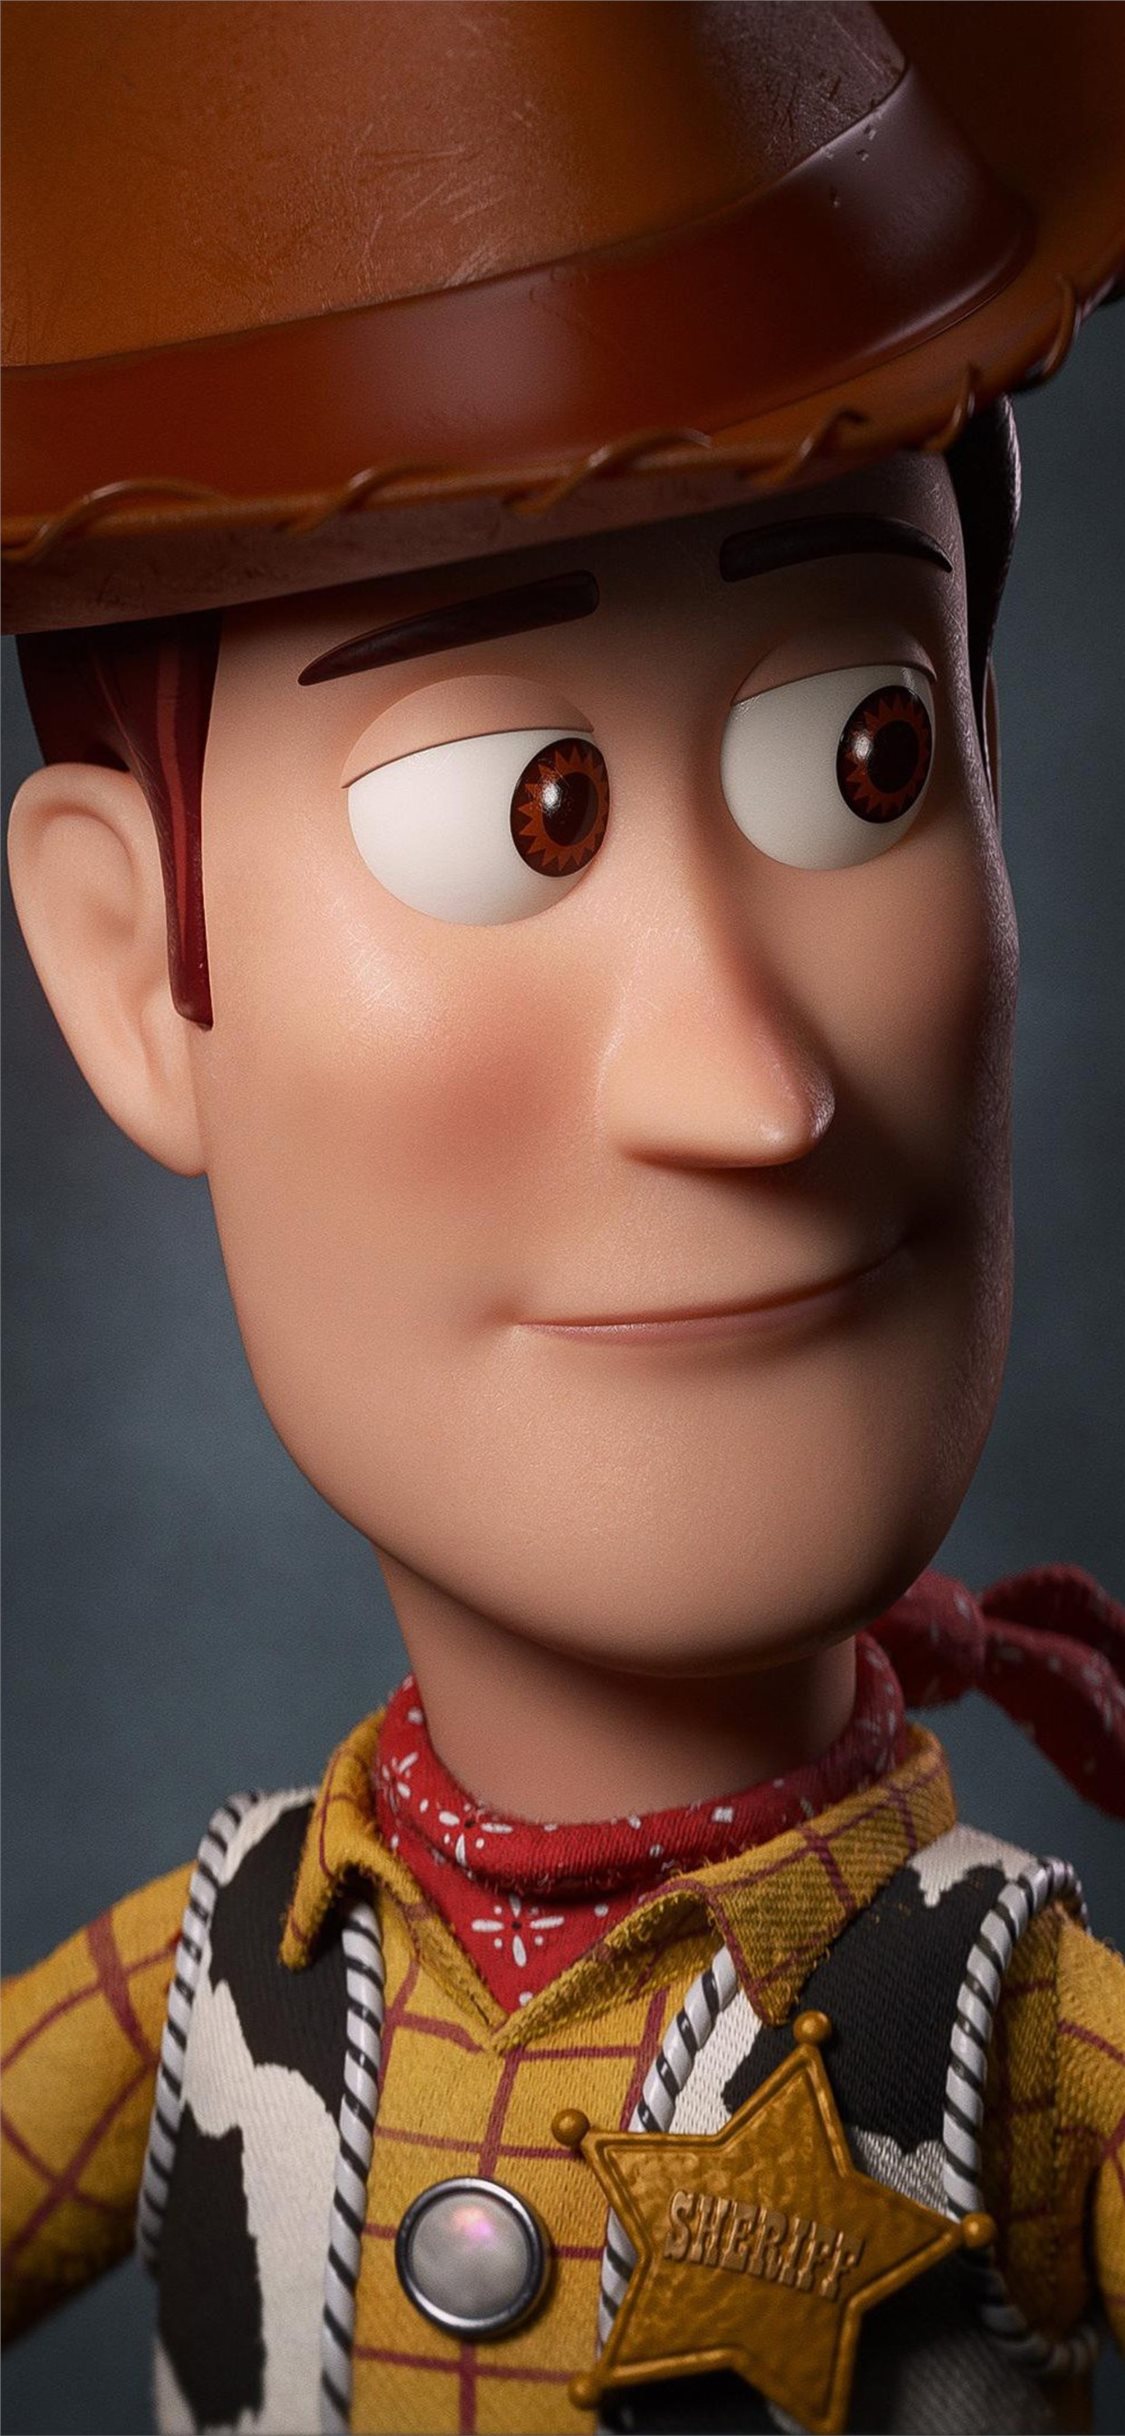 Toy Story Wallpaper Iphone - HD Wallpaper 